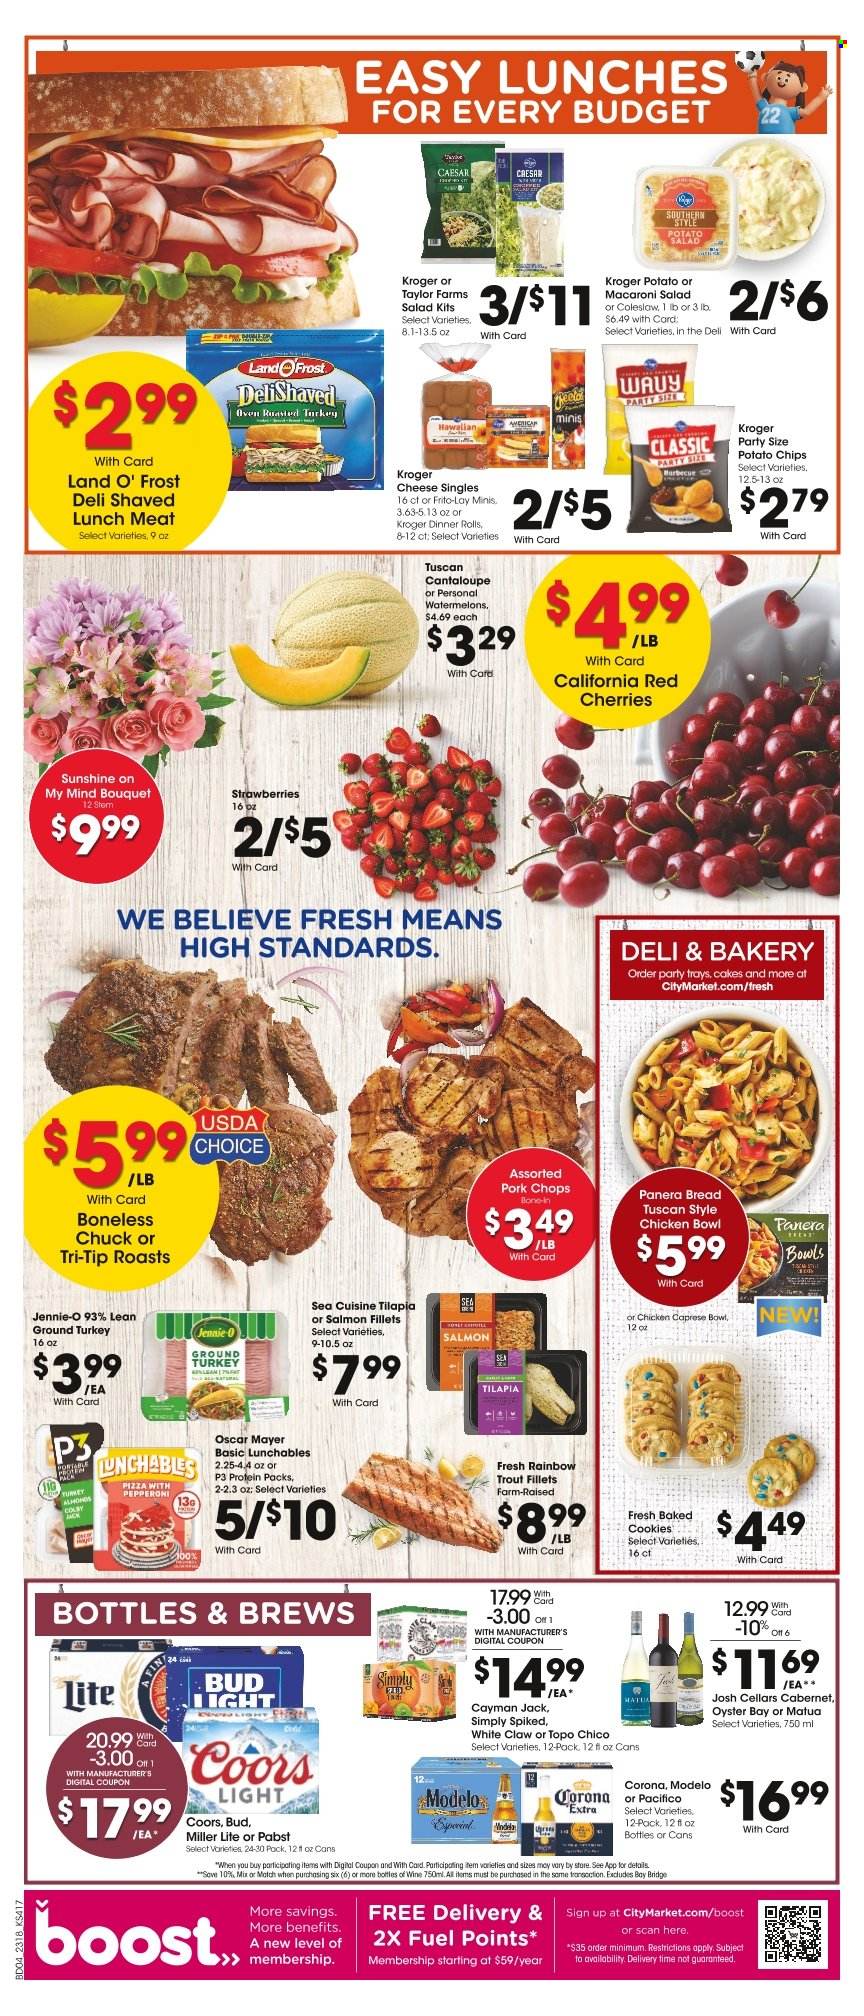 thumbnail - City Market Flyer - 05/31/2023 - 06/06/2023 - Sales products - bread, dinner rolls, cantaloupe, watermelon, cherries, salmon fillet, tilapia, trout, oysters, coleslaw, pizza, Lunchables, Oscar Mayer, macaroni salad, lunch meat, cookies, potato chips, chips, Frito-Lay, almonds, lemonade, sparkling water, Boost, Cabernet Sauvignon, wine, alcohol, White Claw, Bud Light, Corona Extra, Modelo, Pabst, Topo Chico, ground turkey, turkey, pork chops, pork meat, bouquet, Miller Lite, Coors. Page 4.